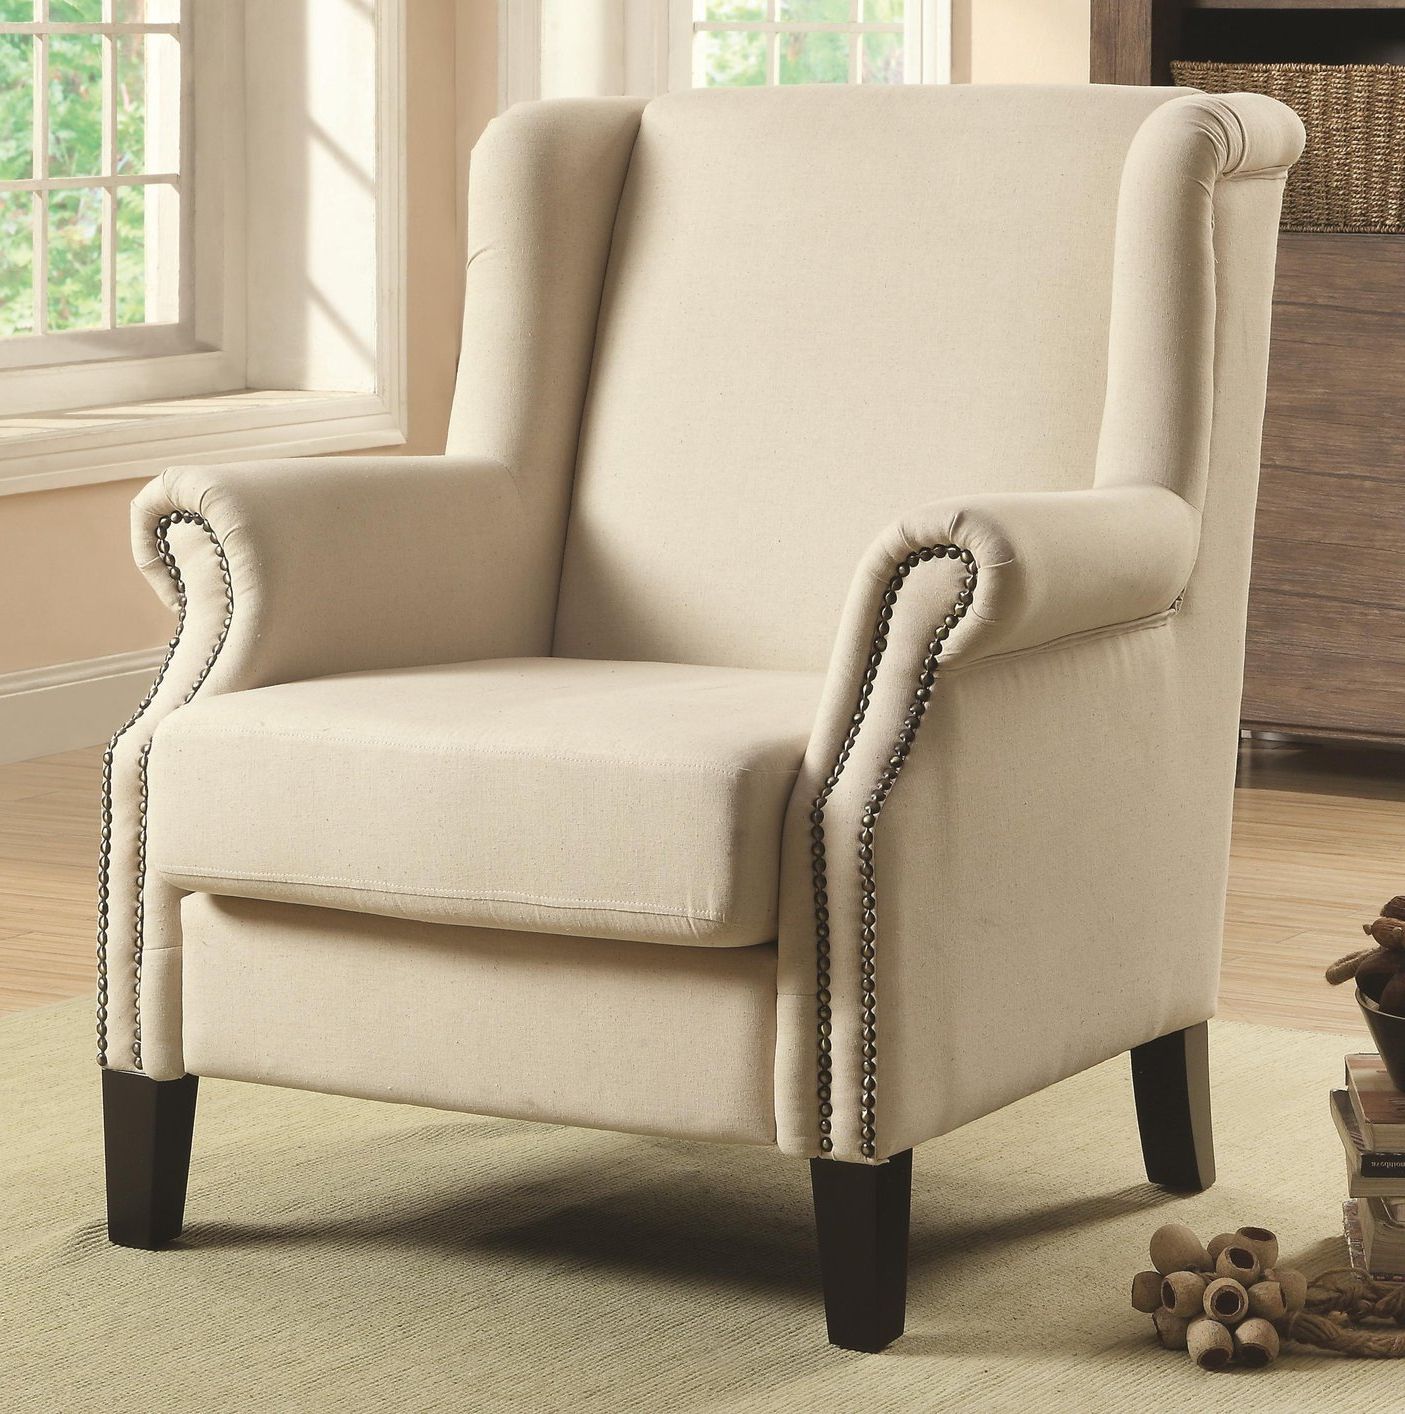 Most Popular Coaster 902229 Beige Fabric Accent Chair – Steal A Sofa Furniture With Regard To Light Beige Round Accent Stools (View 2 of 10)